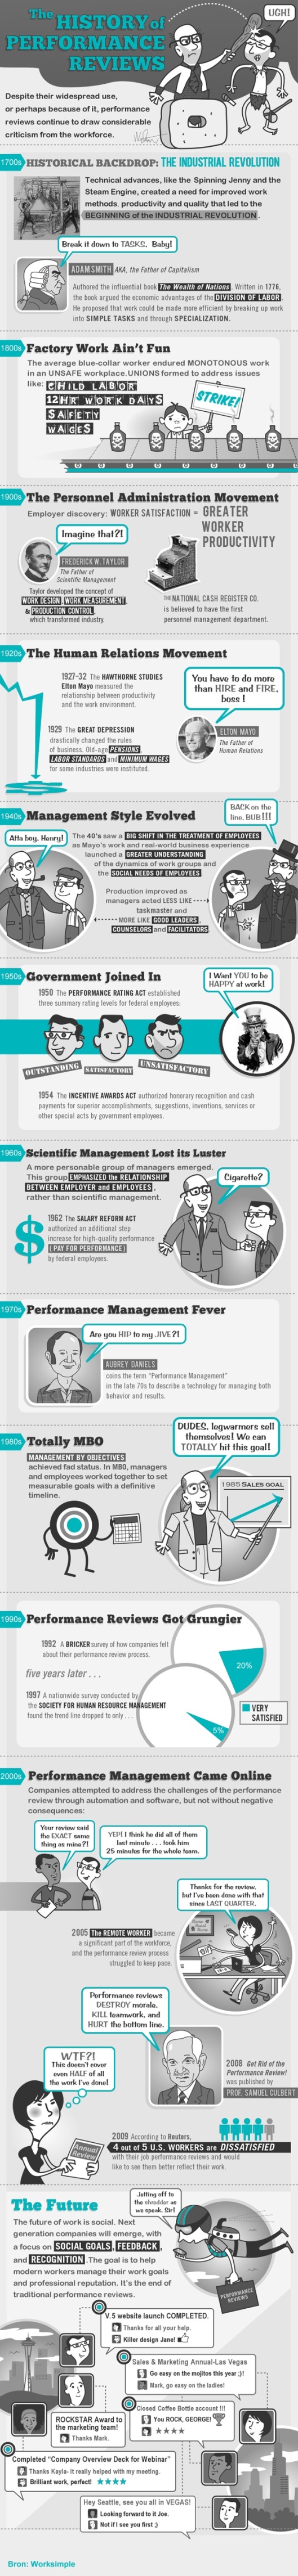 The History of Performance Reviews 10 31 2013 HR